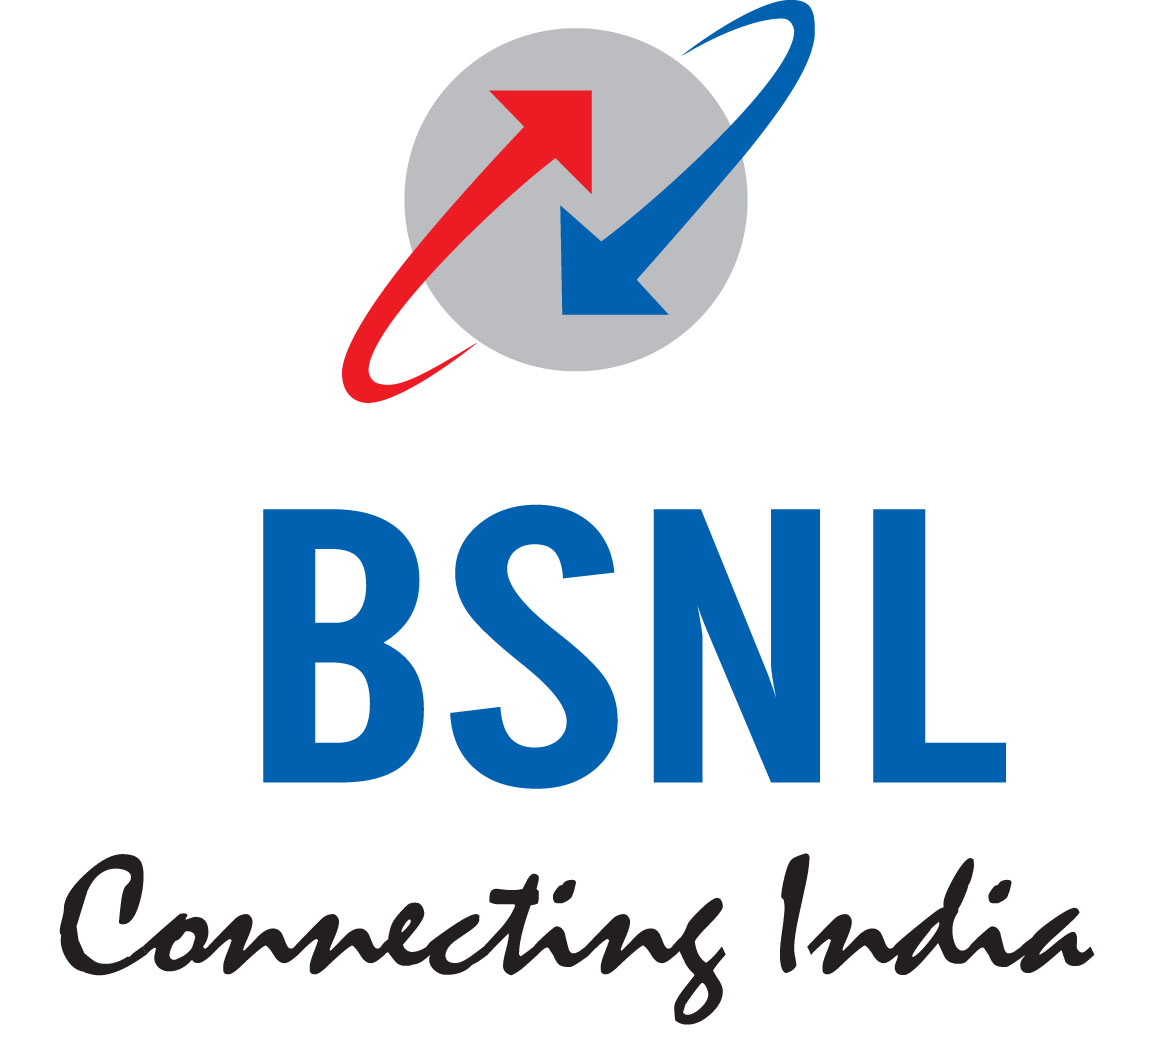 India has stringent radiation measures for Mobile Tower Stations, BSNL Chief